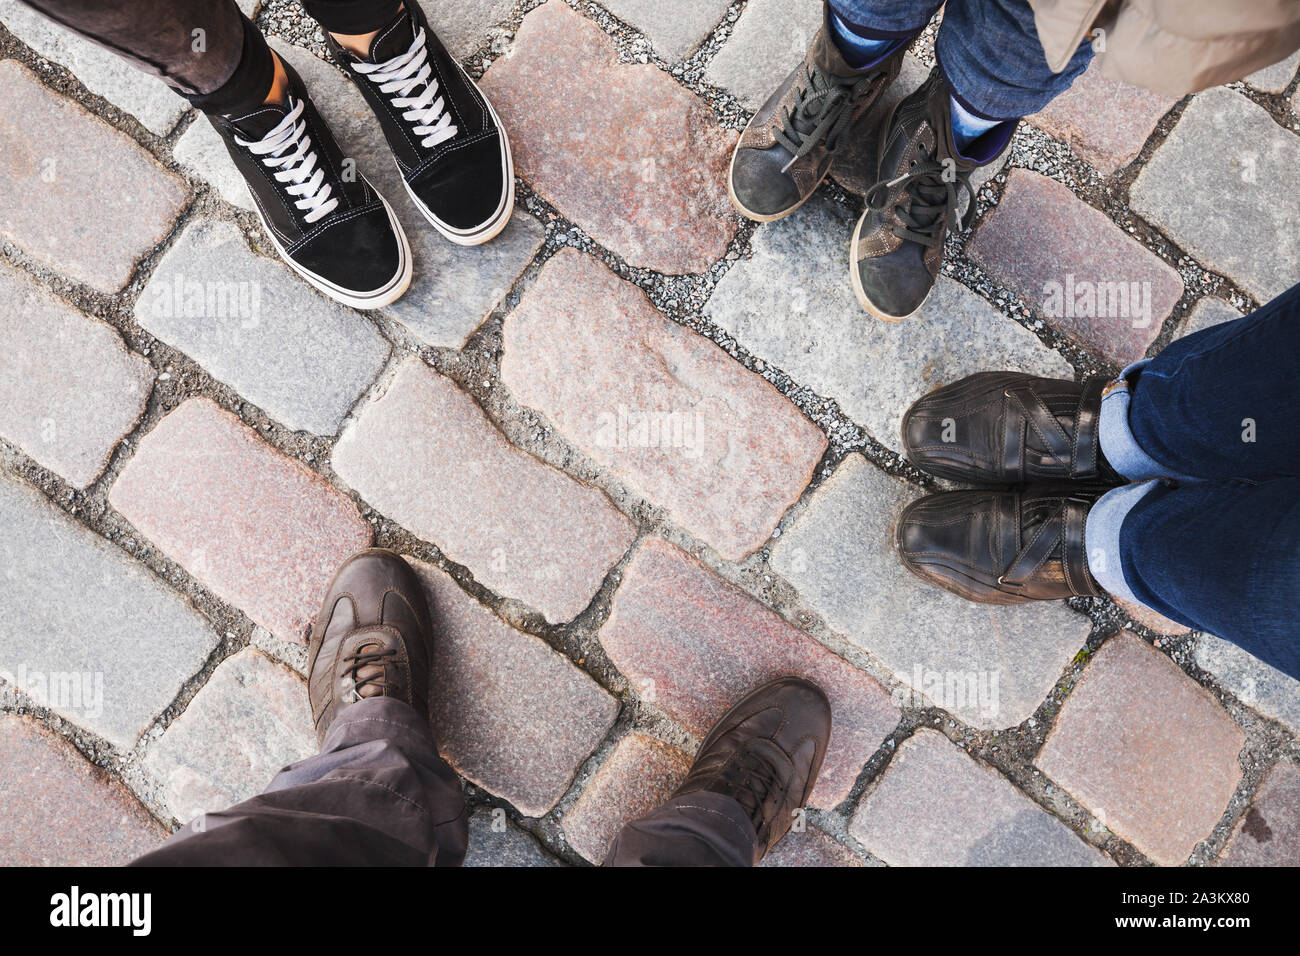 Feet of a family standing together on a paved street, top view Stock Photo